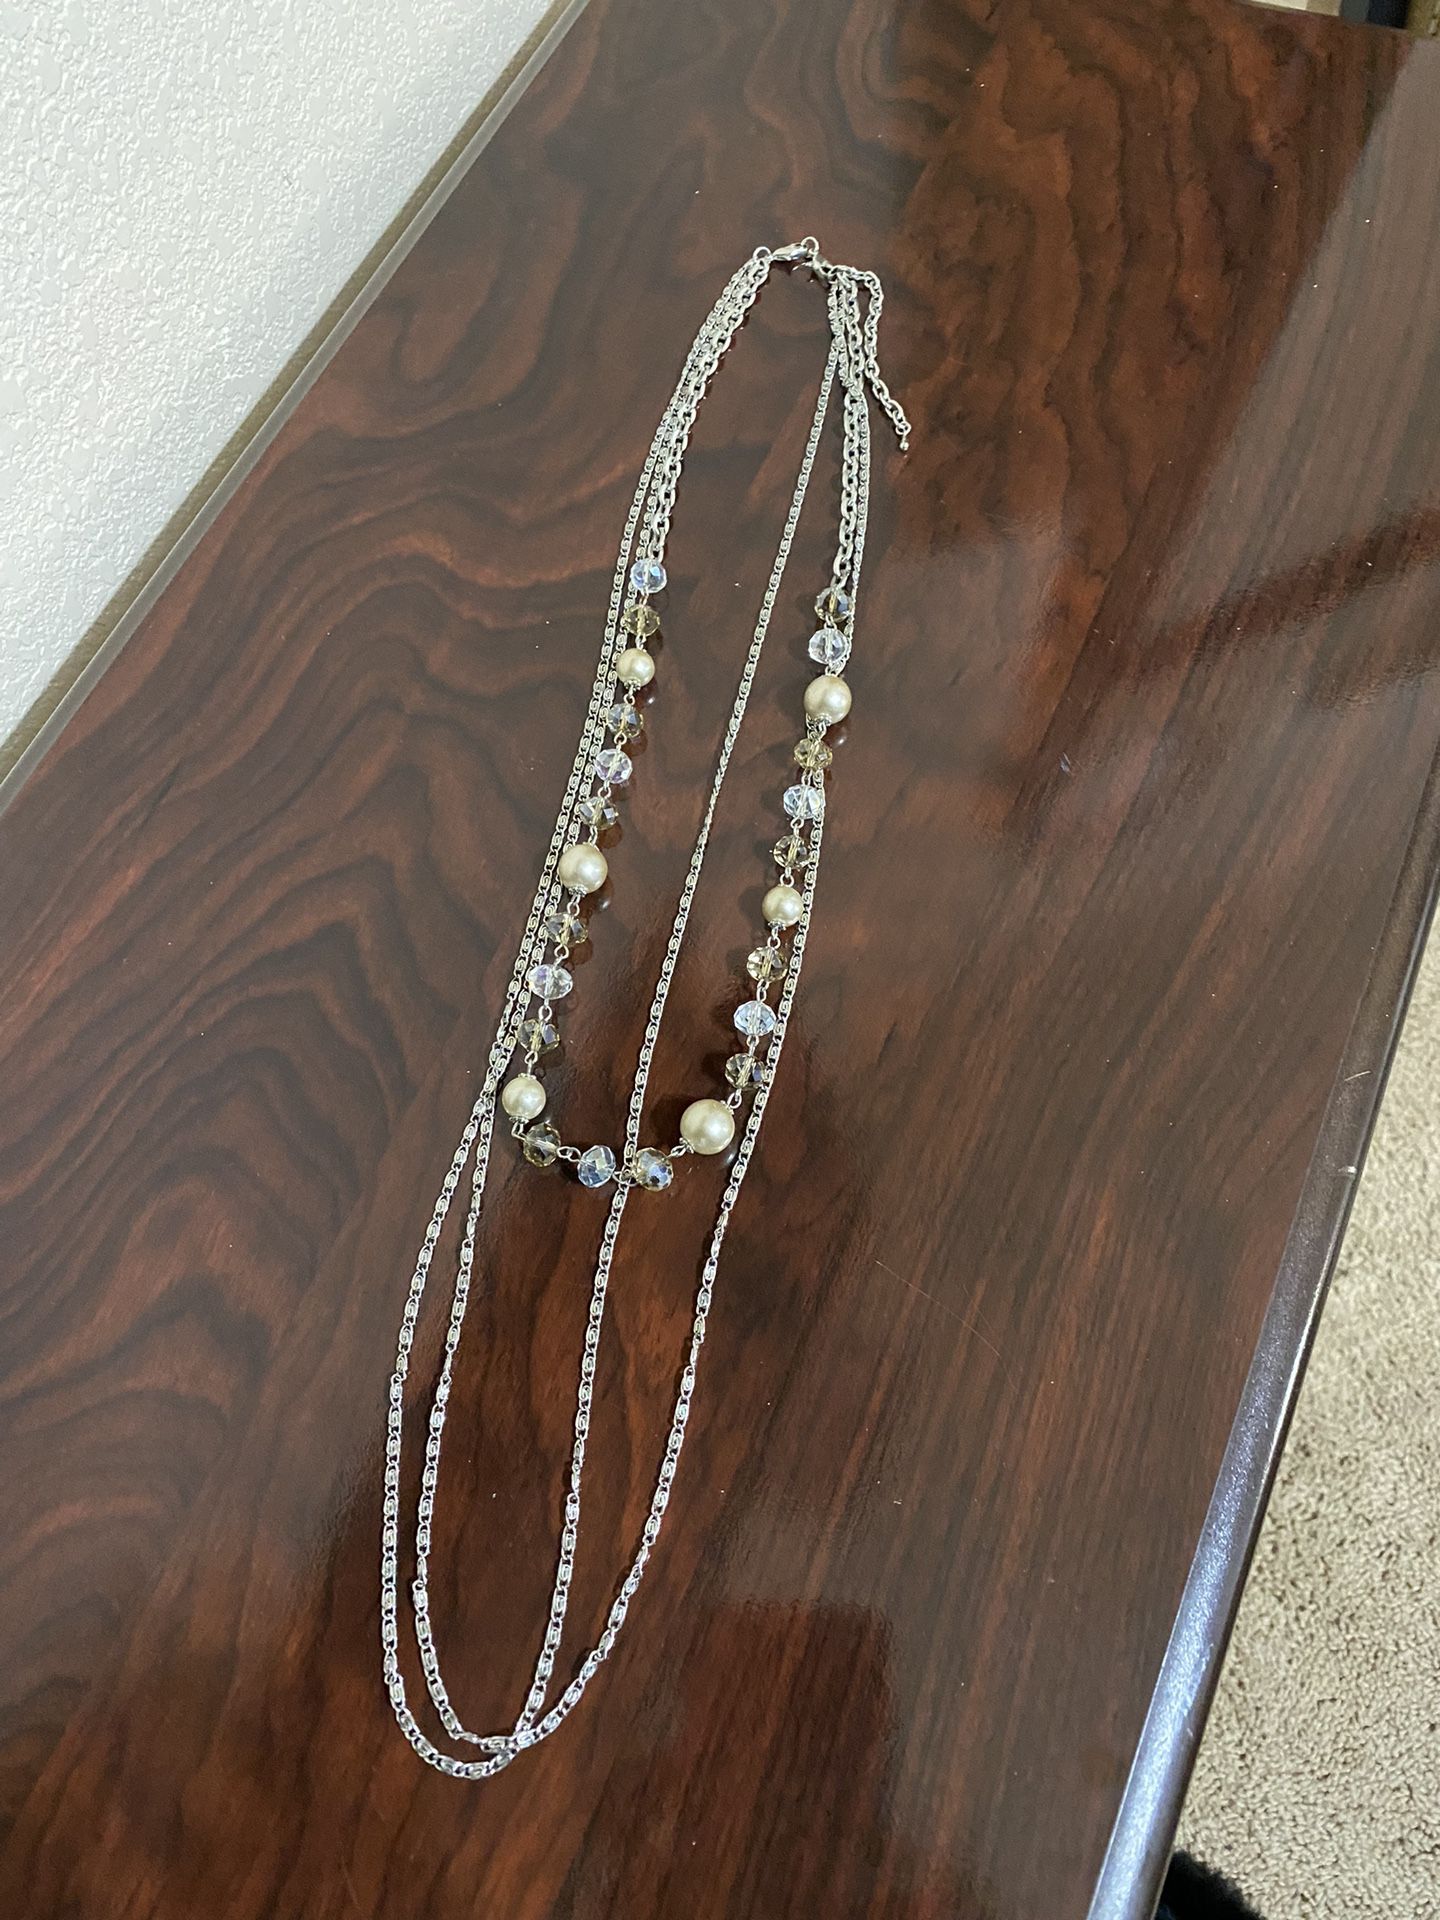 20” L Silver Tone With Pearls & Crystal Beads $5.00